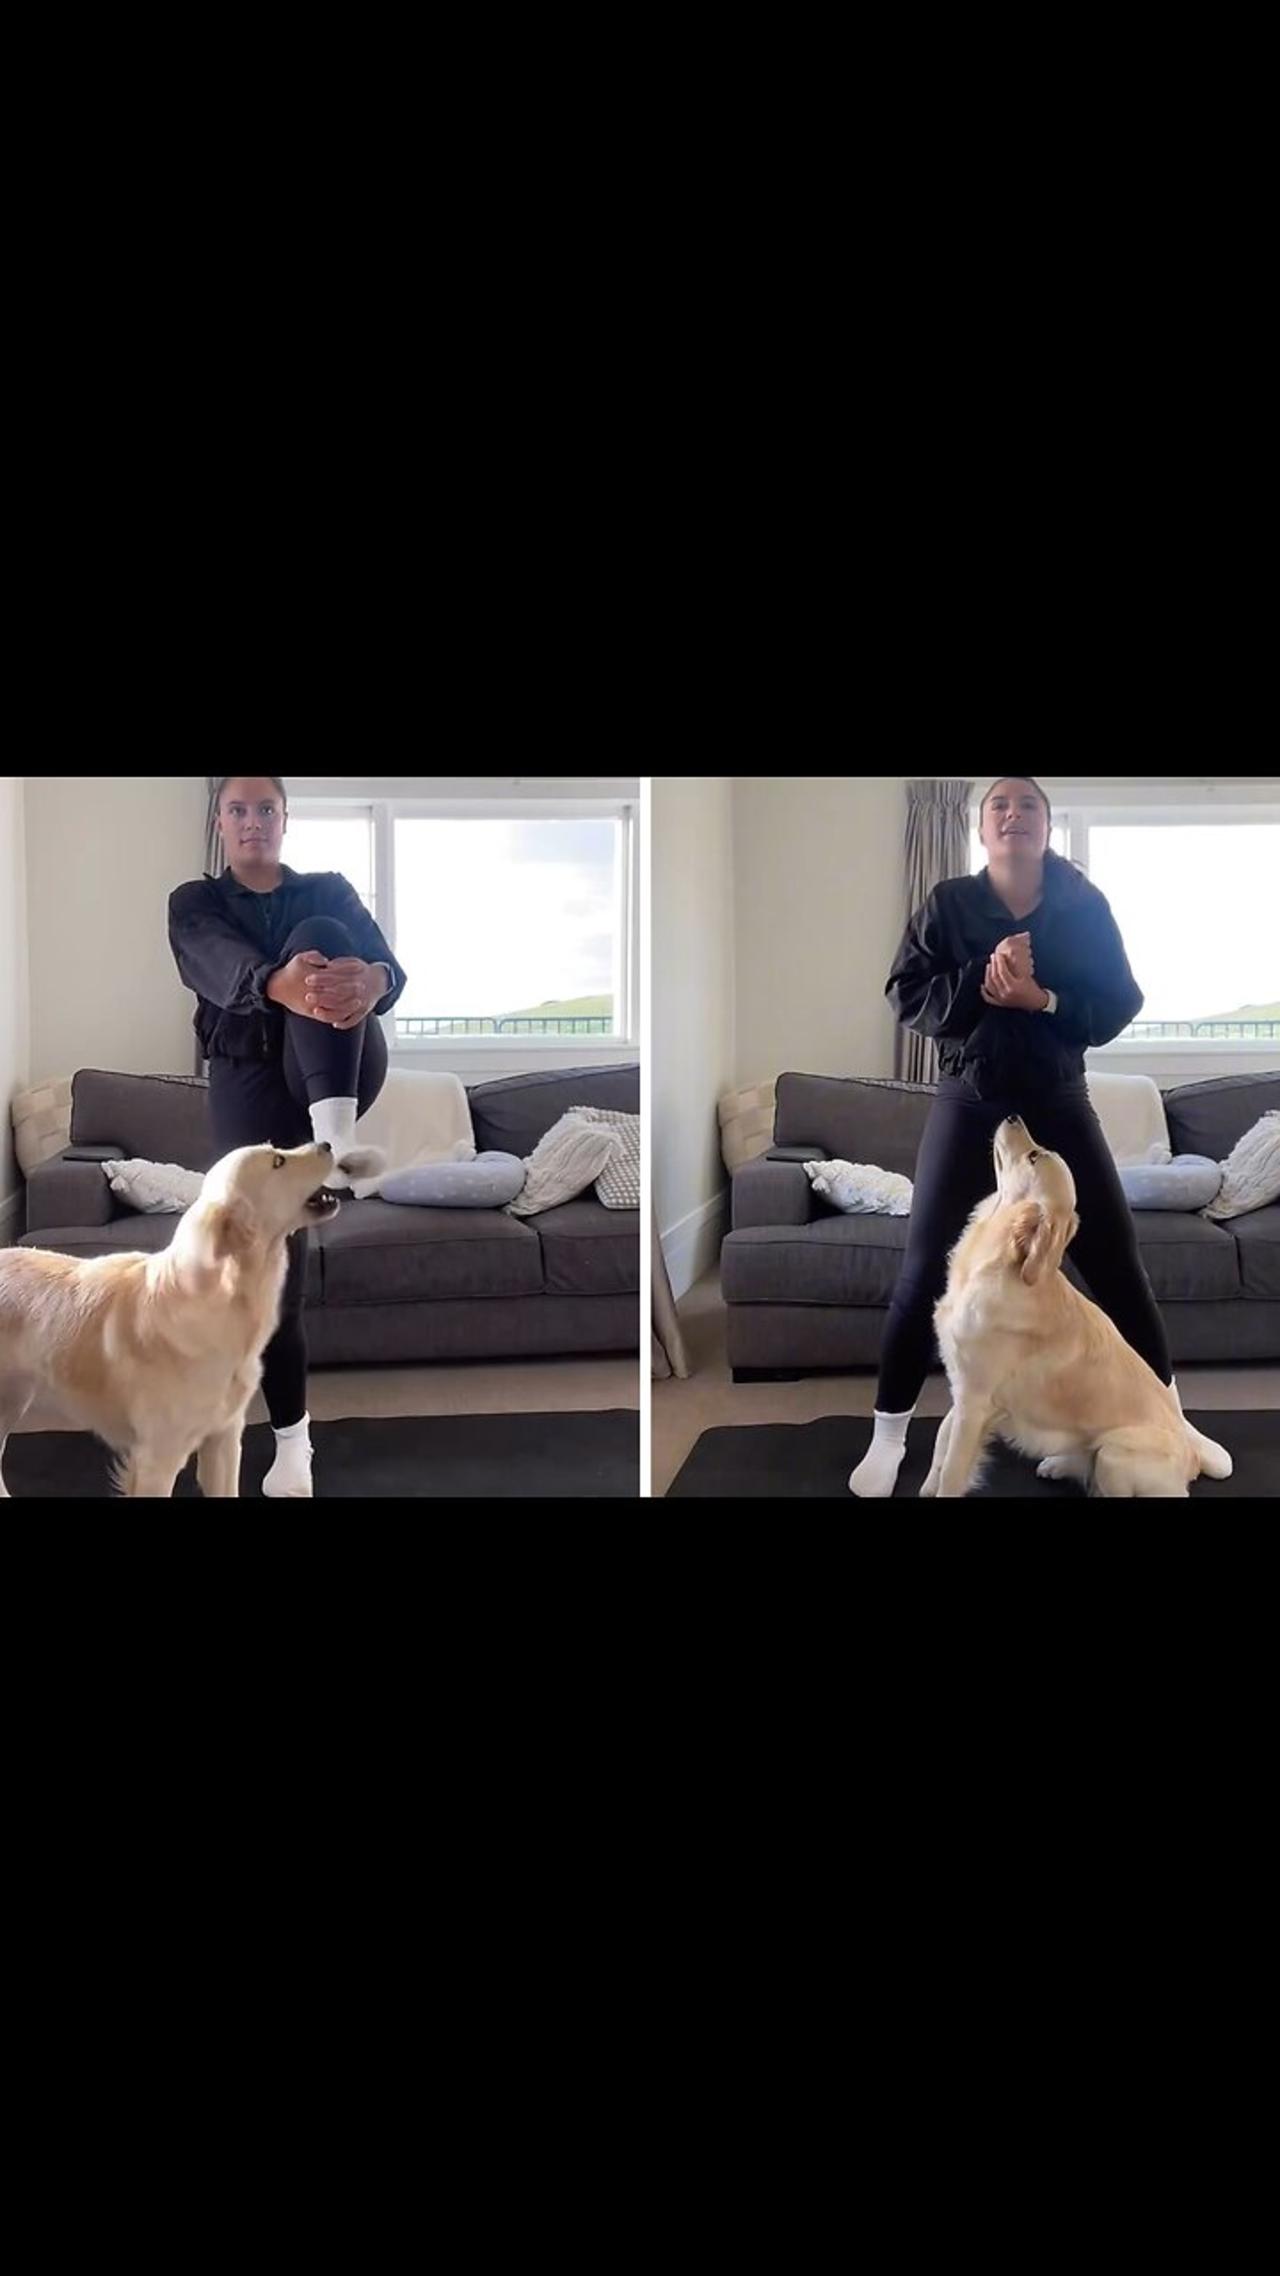 Home workouts with a Golden Retriever are hilariously impossible